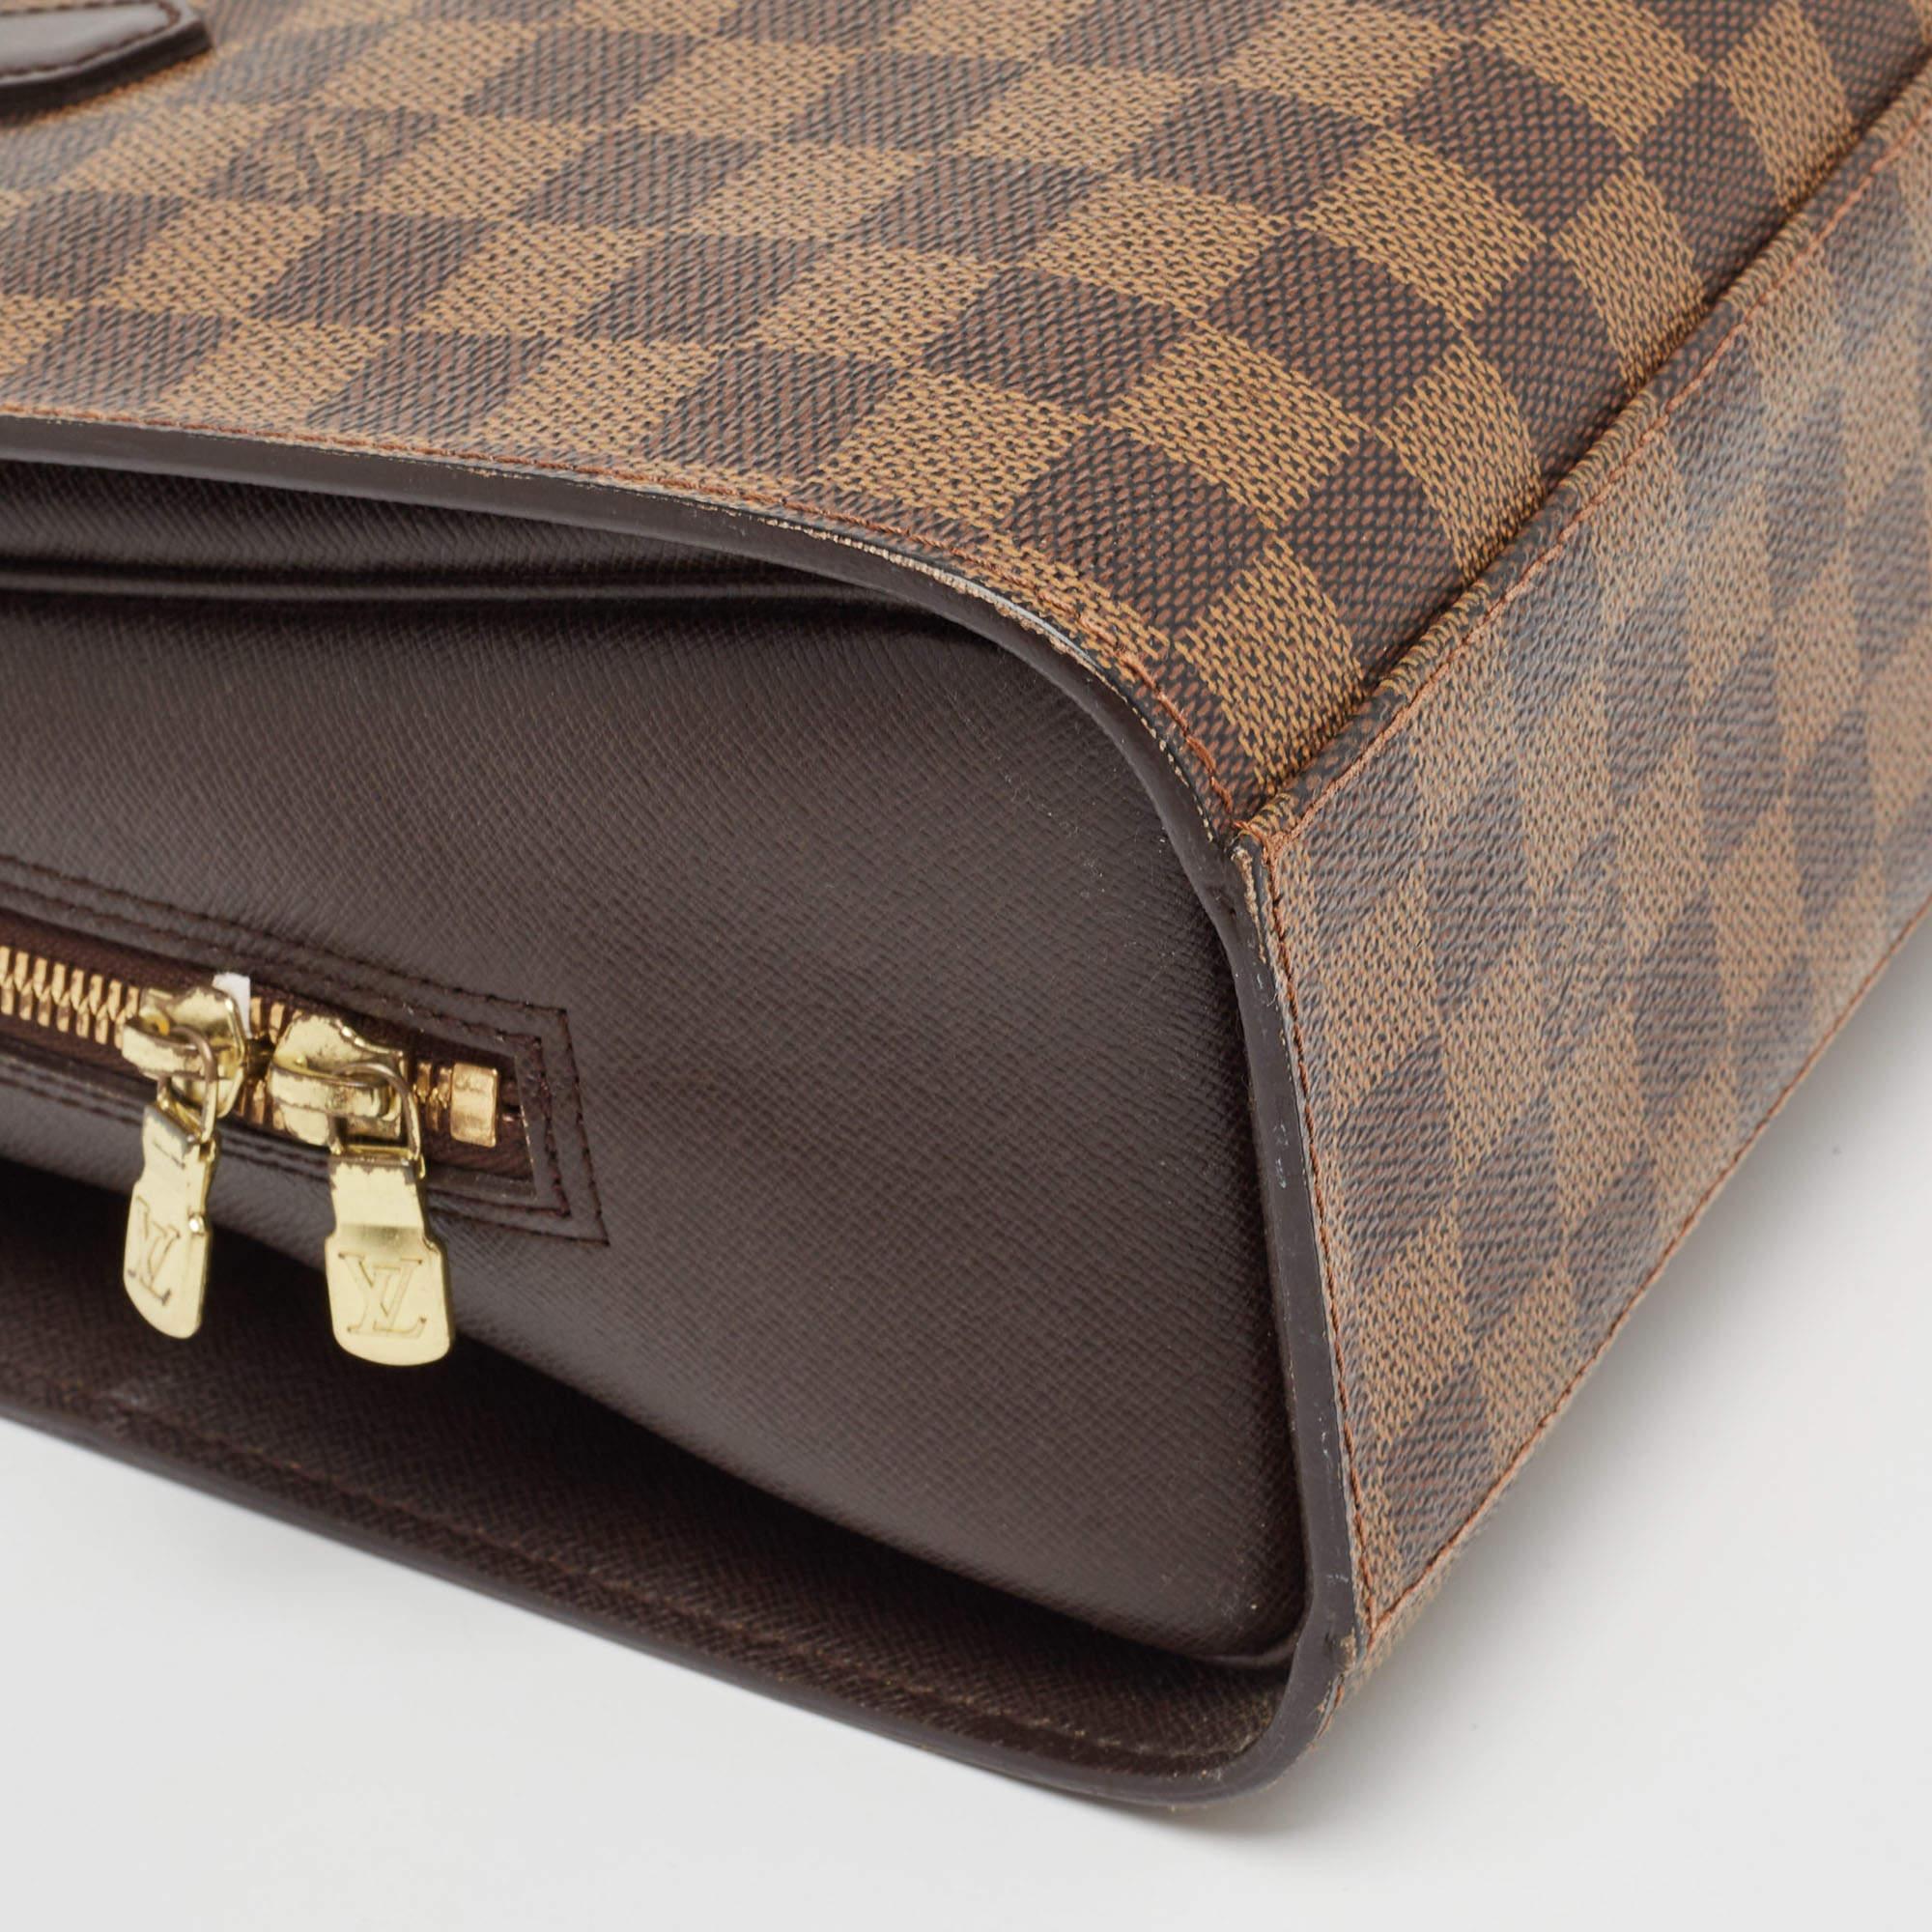 Louis Vuitton Damier Ebene Canvas and Leather Triana Bag 3